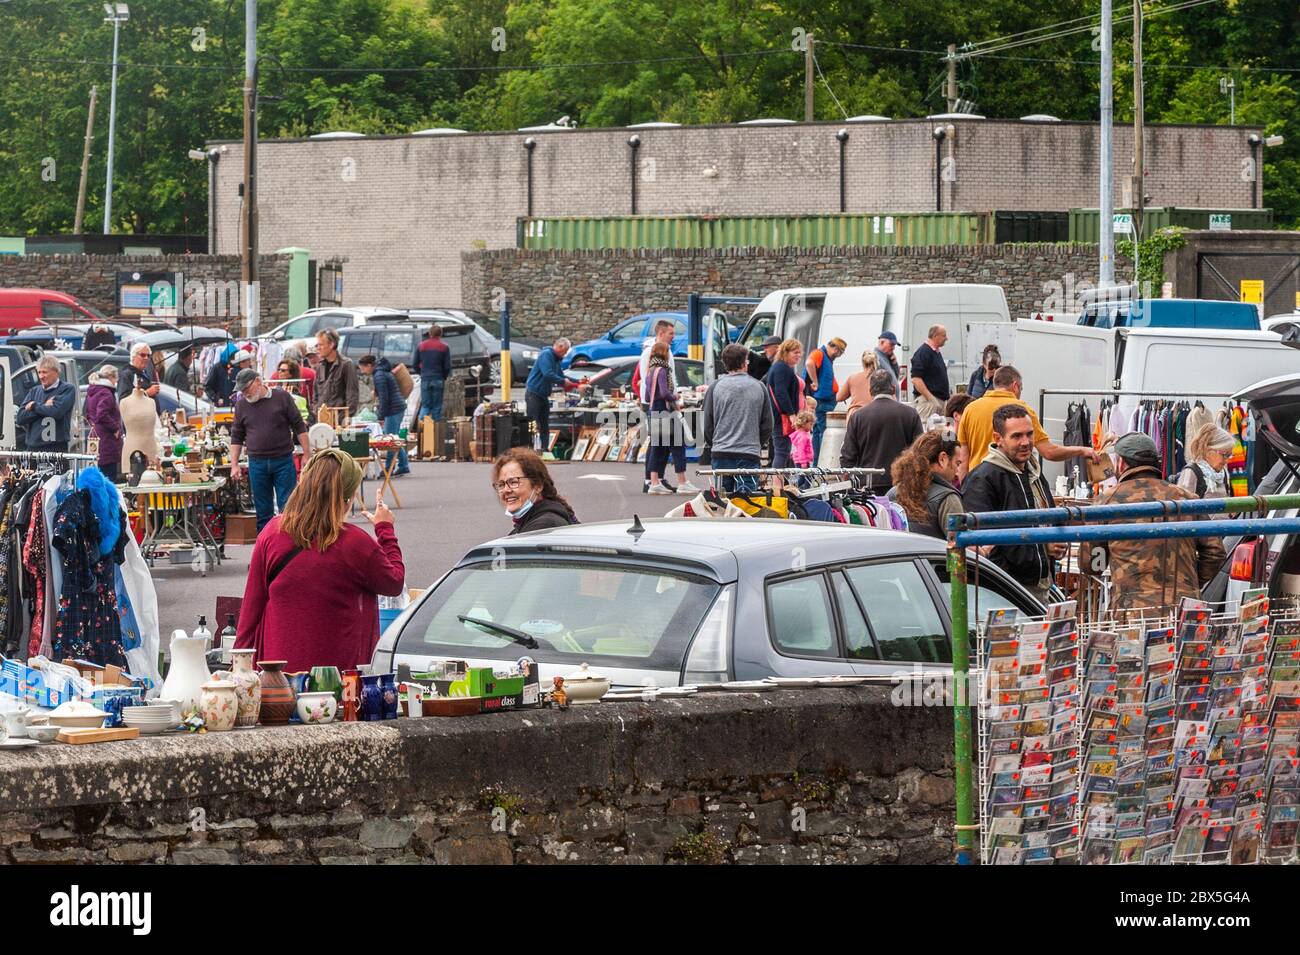 Bantry, West Cork, Ireland. 5th June, 2020. Bantry Friday Market was busy today with lots of traders and shoppers present. The first market in June is always busy, more so this week after the long shut down due to the Covid-19 pandemic. Credit: AG News/Alamy Live News Stock Photo